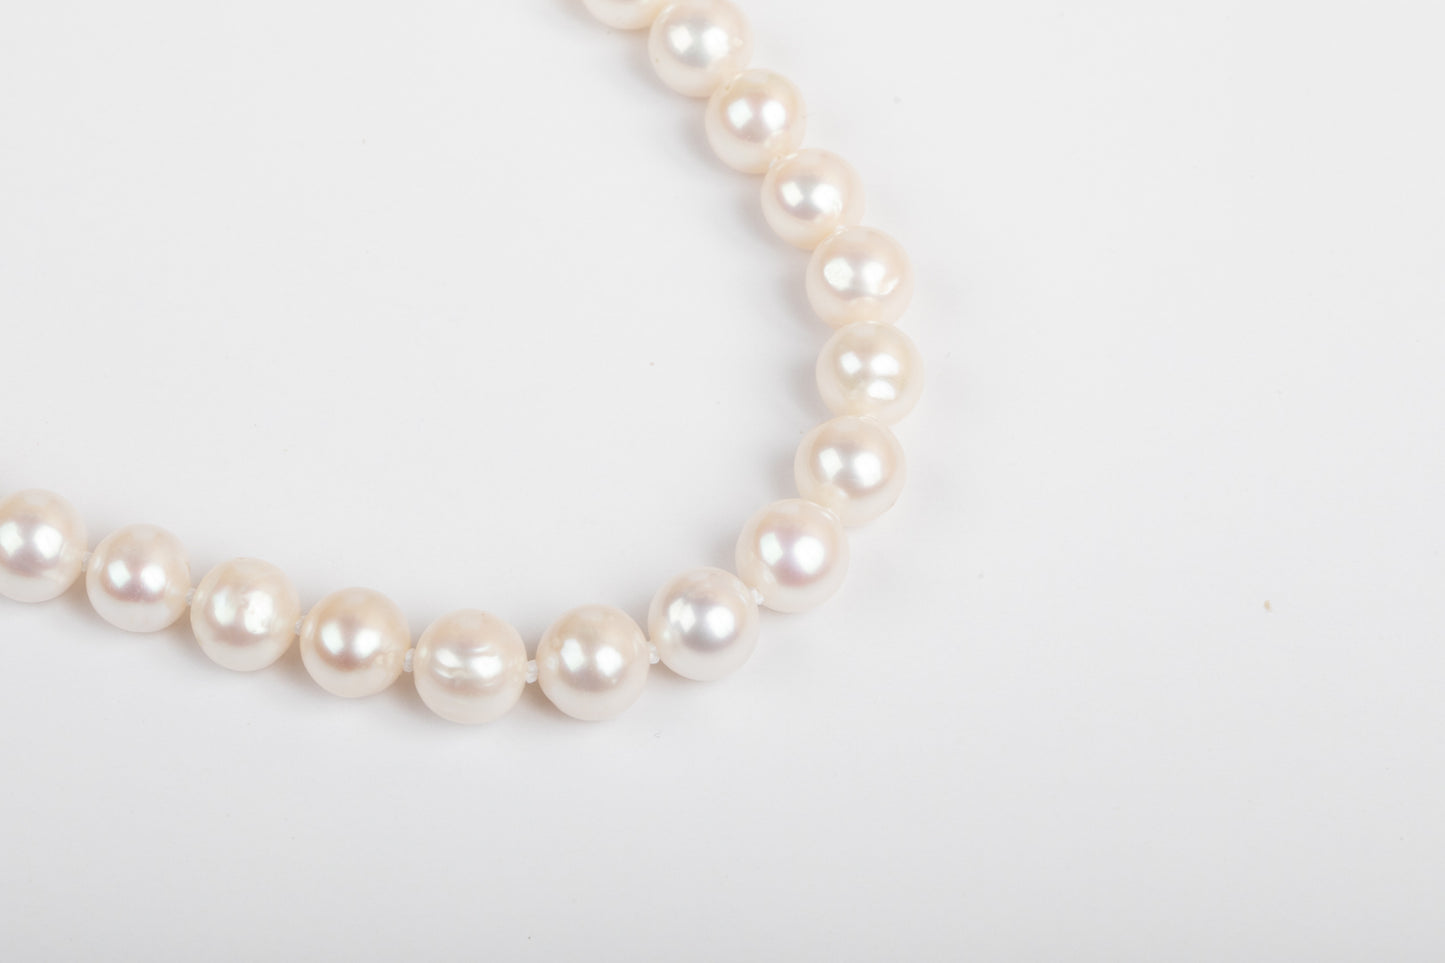 Elegant 9 mm Silver Pearl Necklace With Magnetic Clasp